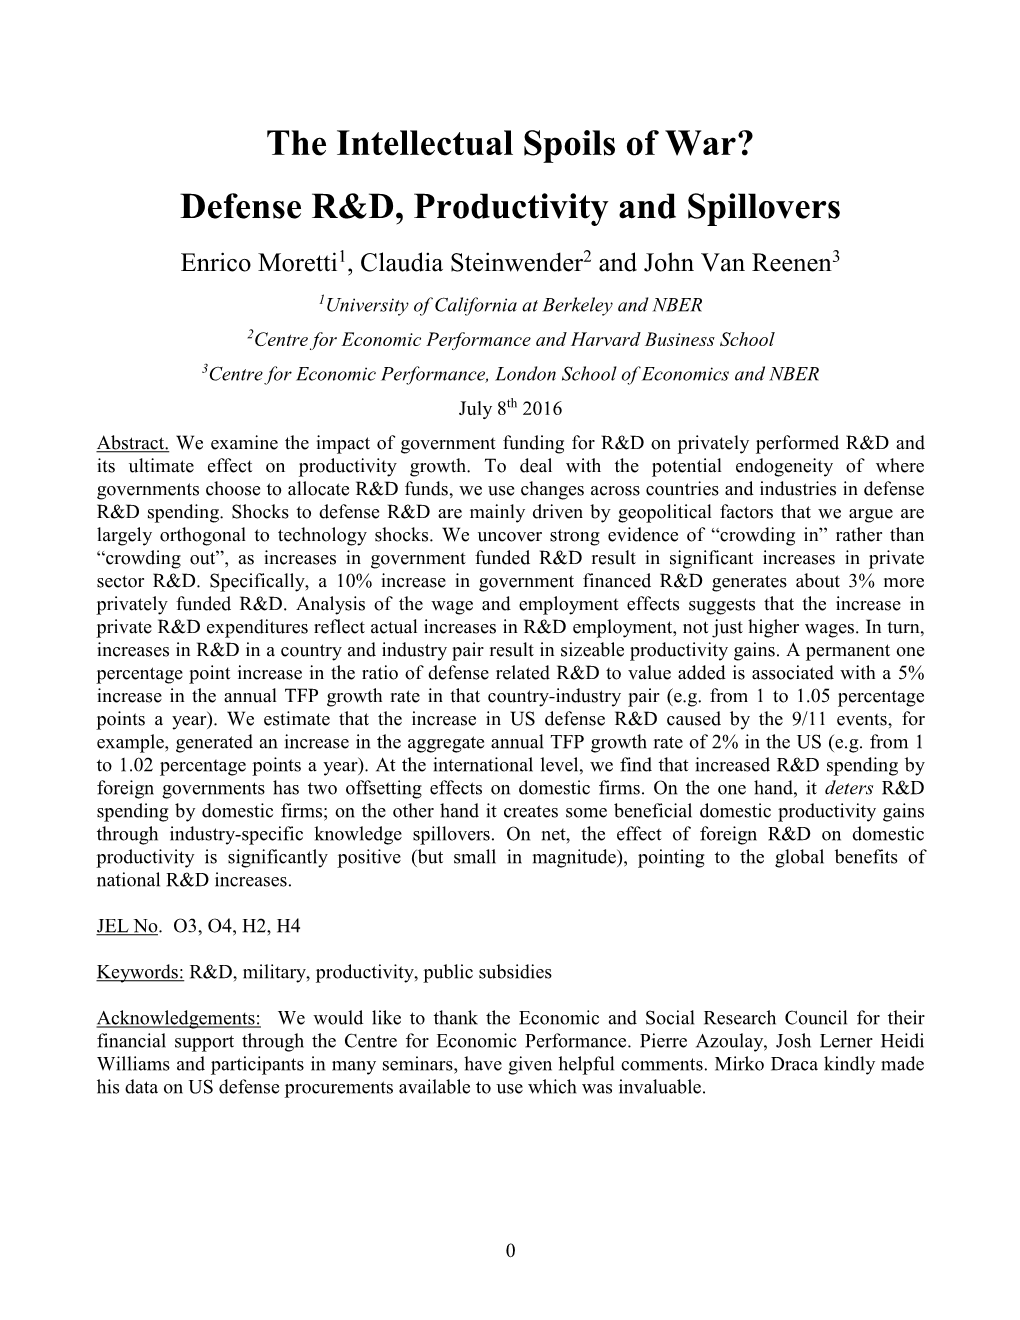 Defense R&D, Productivity and Spillovers